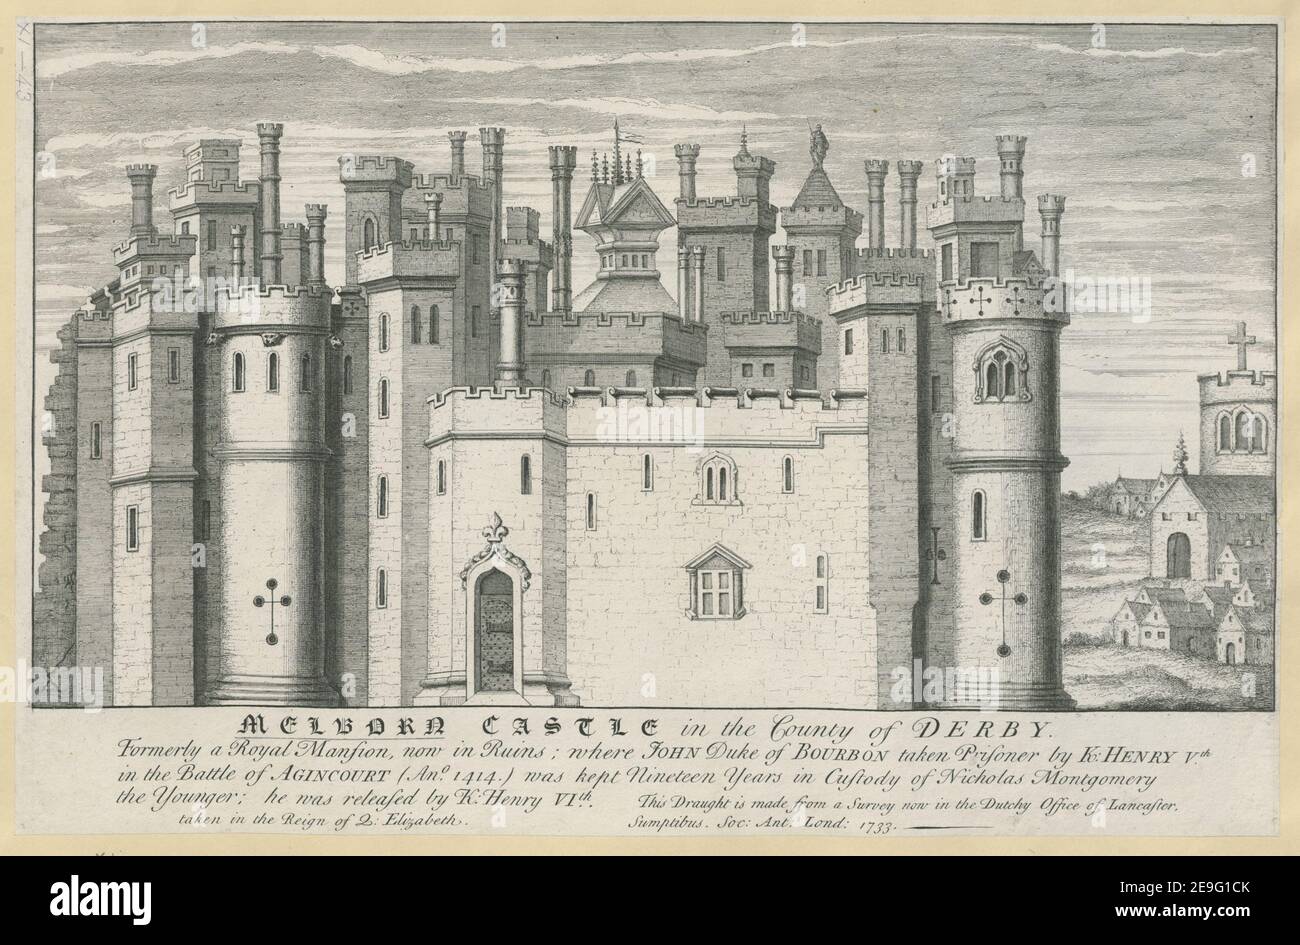 Melbourn Castle in the County of Derby  Author  Mason, James 11.43. Place of publication: [London] Publisher: [Society of Antiquaries] Date of publication: [1733]  Item type: 1 print Medium: etching Dimensions: sheet 29.4 x 45.8 cm [trimmed within platemark]  Former owner: George III, King of Great Britain, 1738-1820 Stock Photo